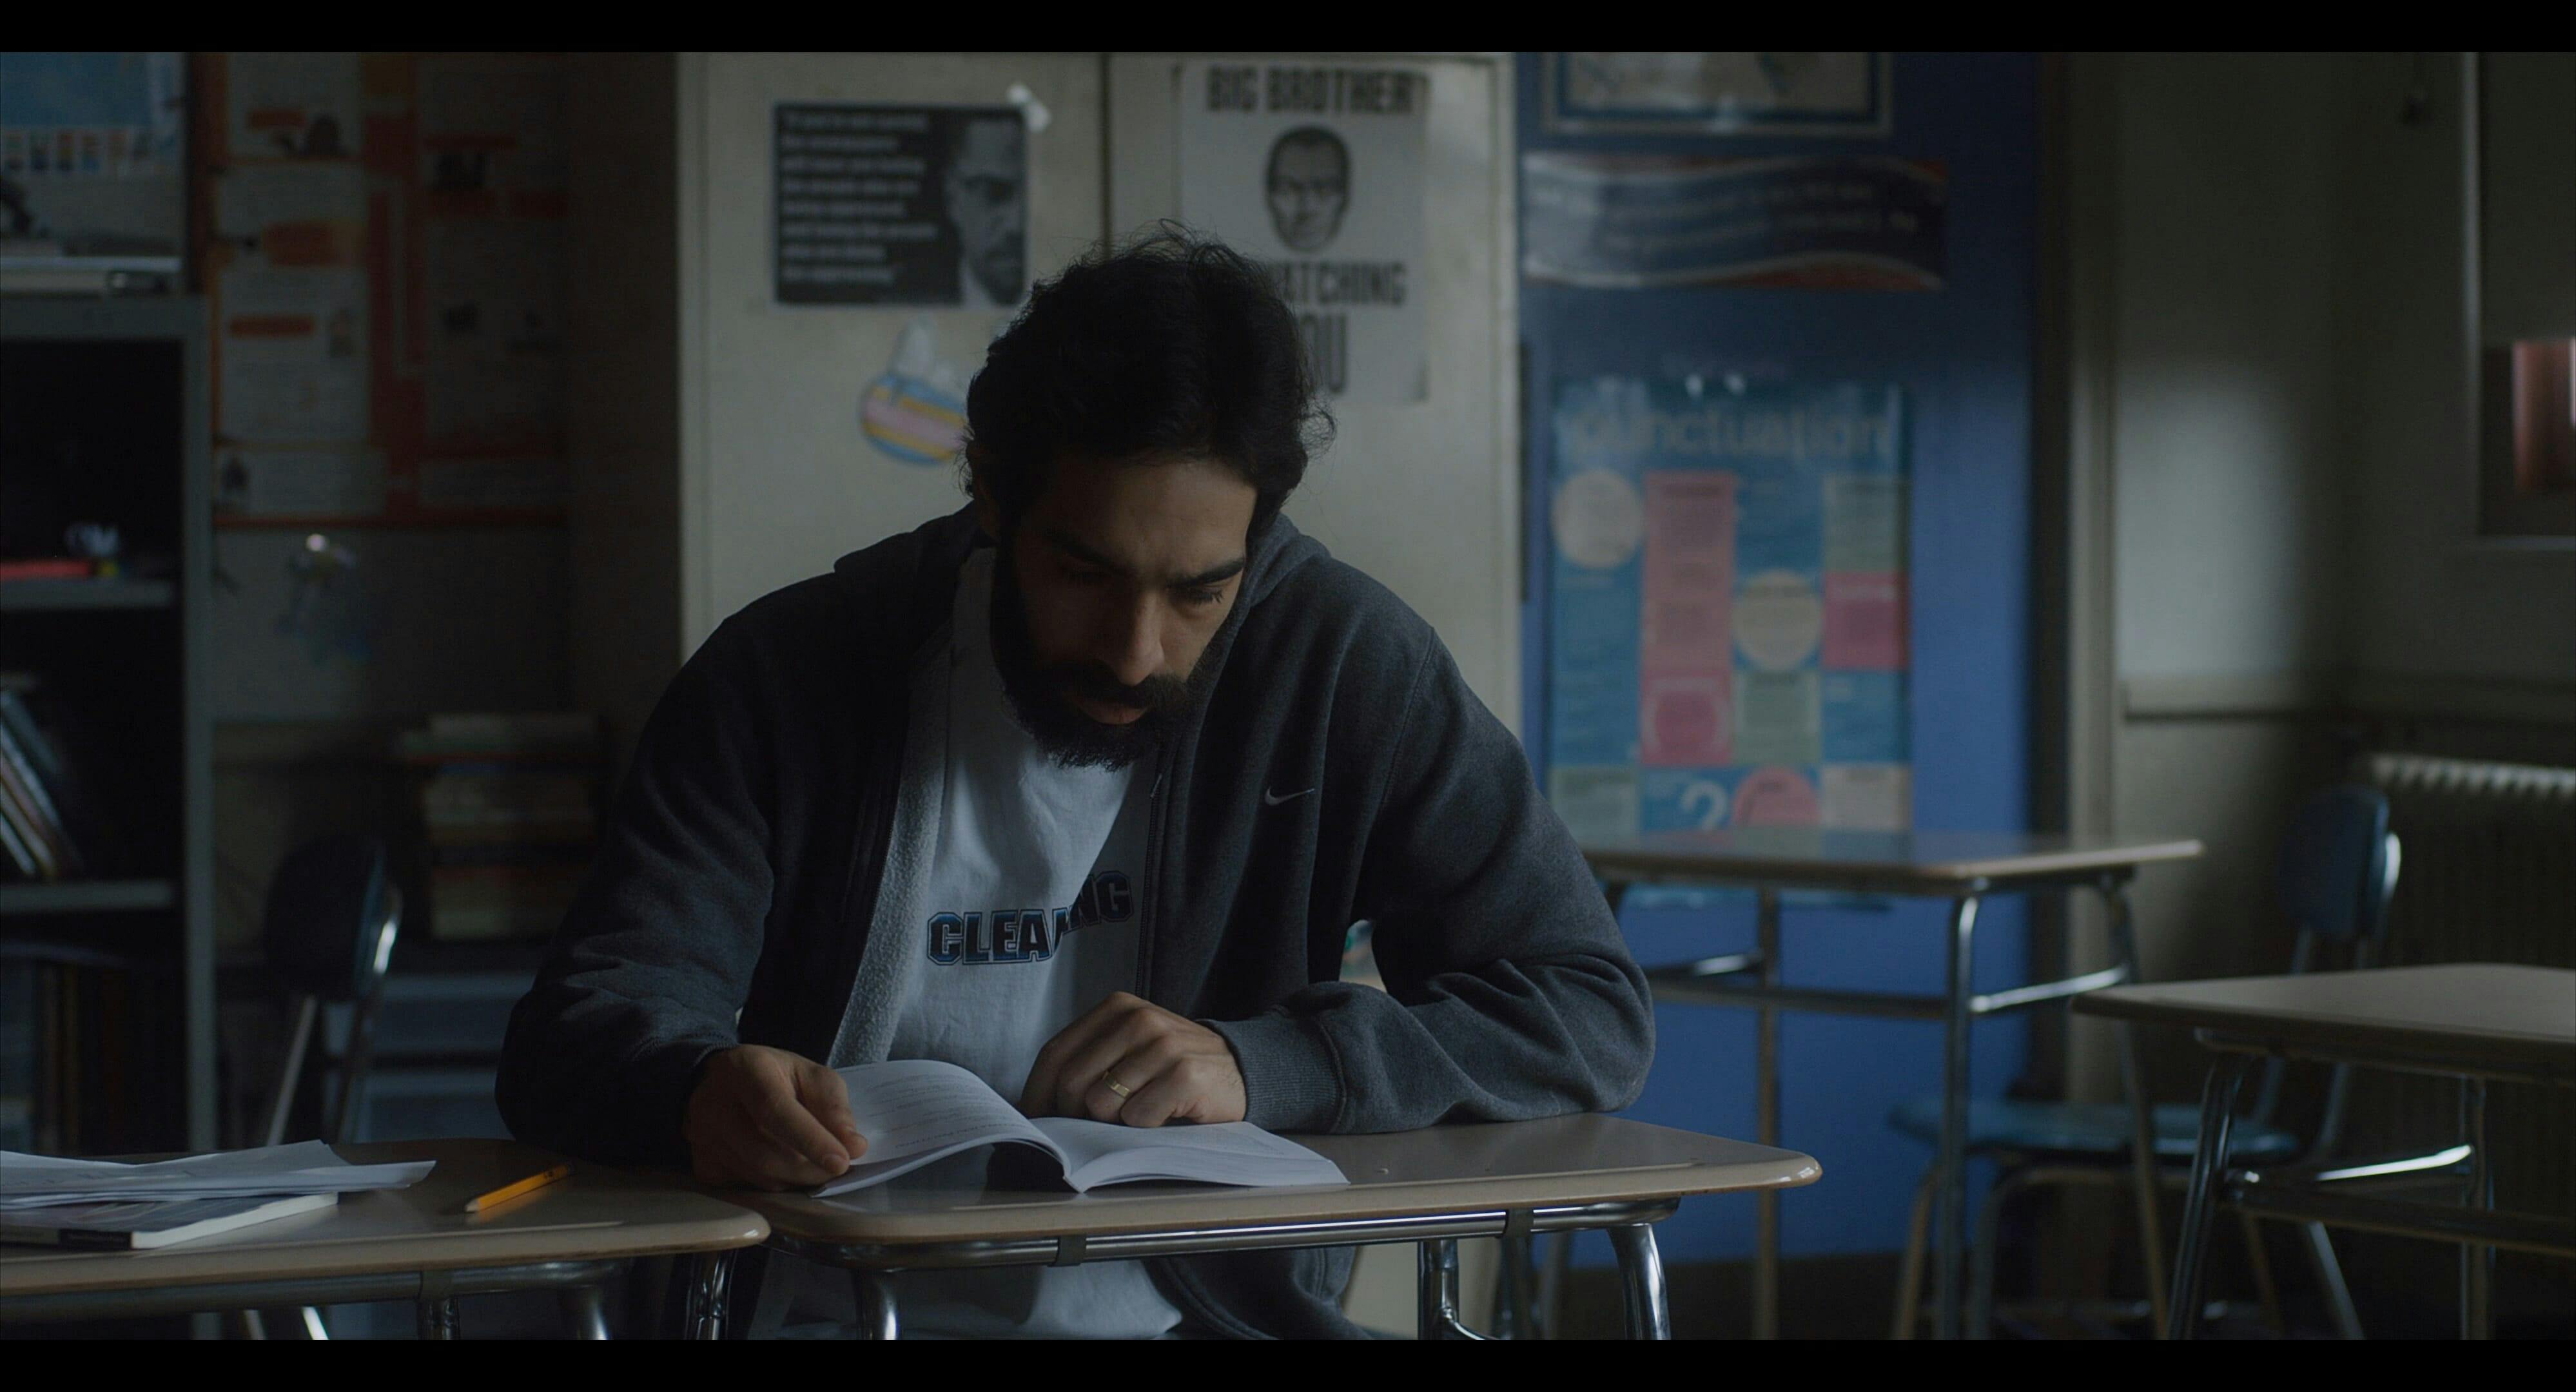 A man learns English in an empty, dark classroom in the film 'Carro.'